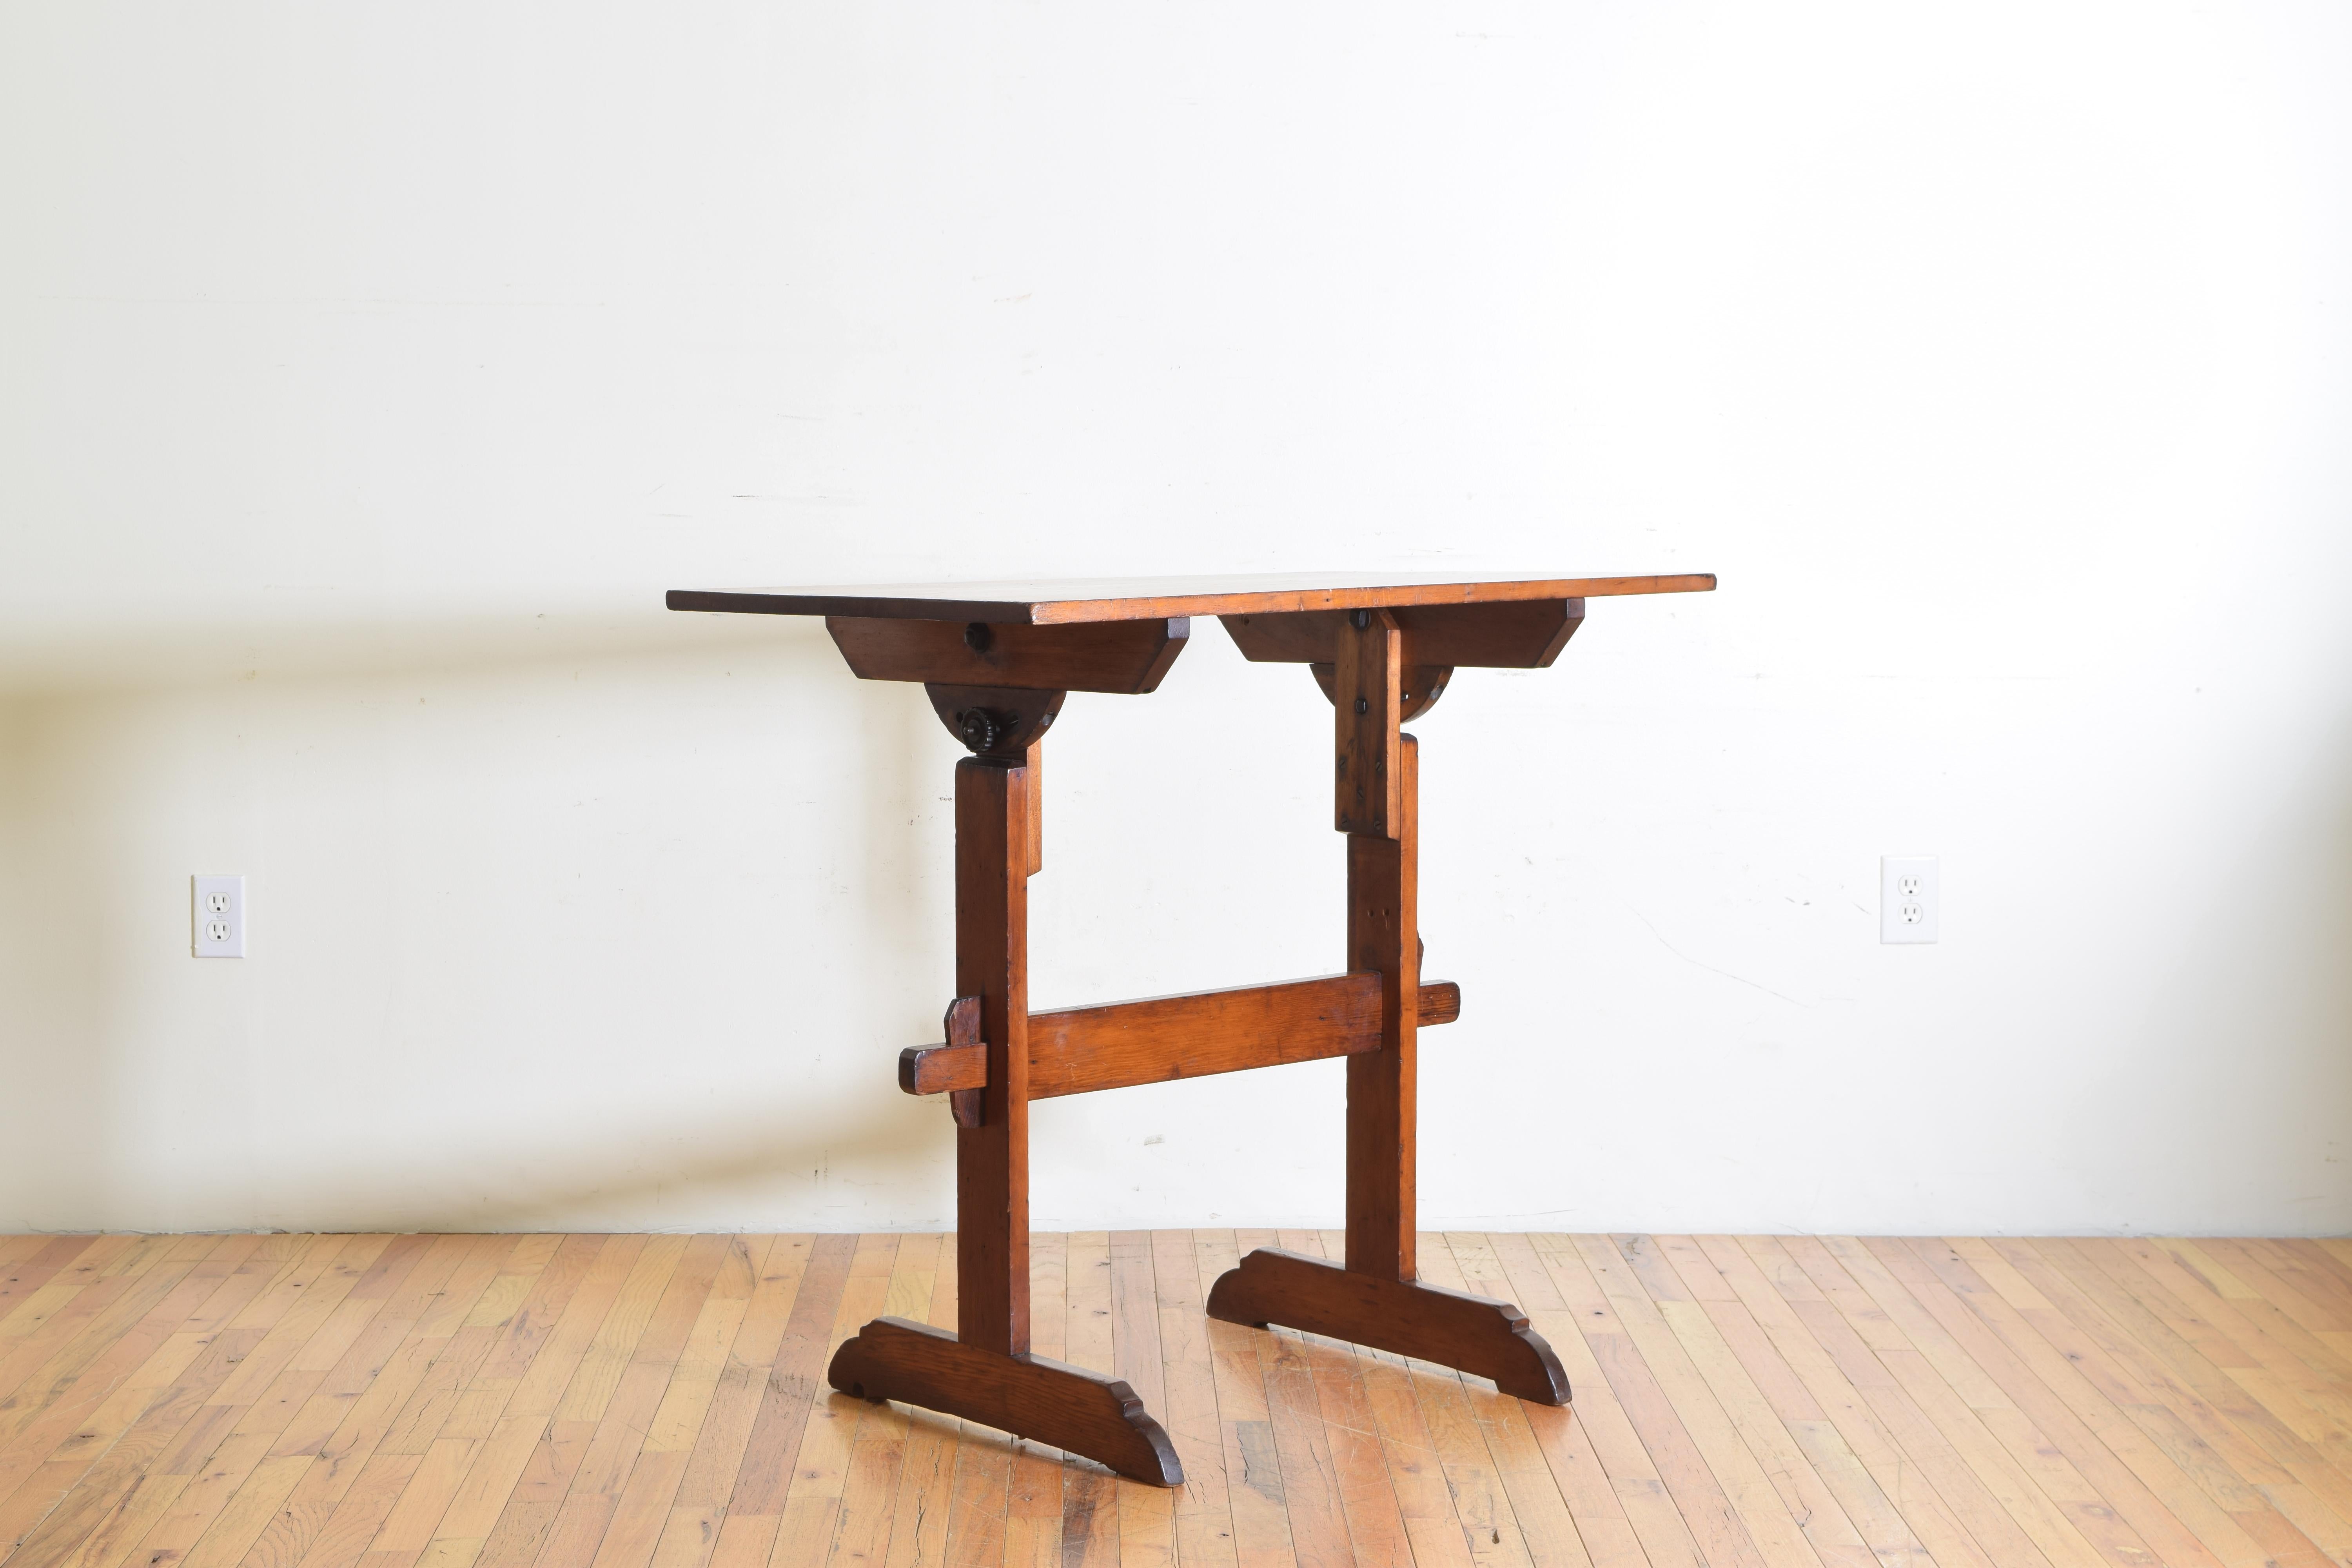 20th Century French Pinewood Adjustable Drafting Table or Desk, circa 1900